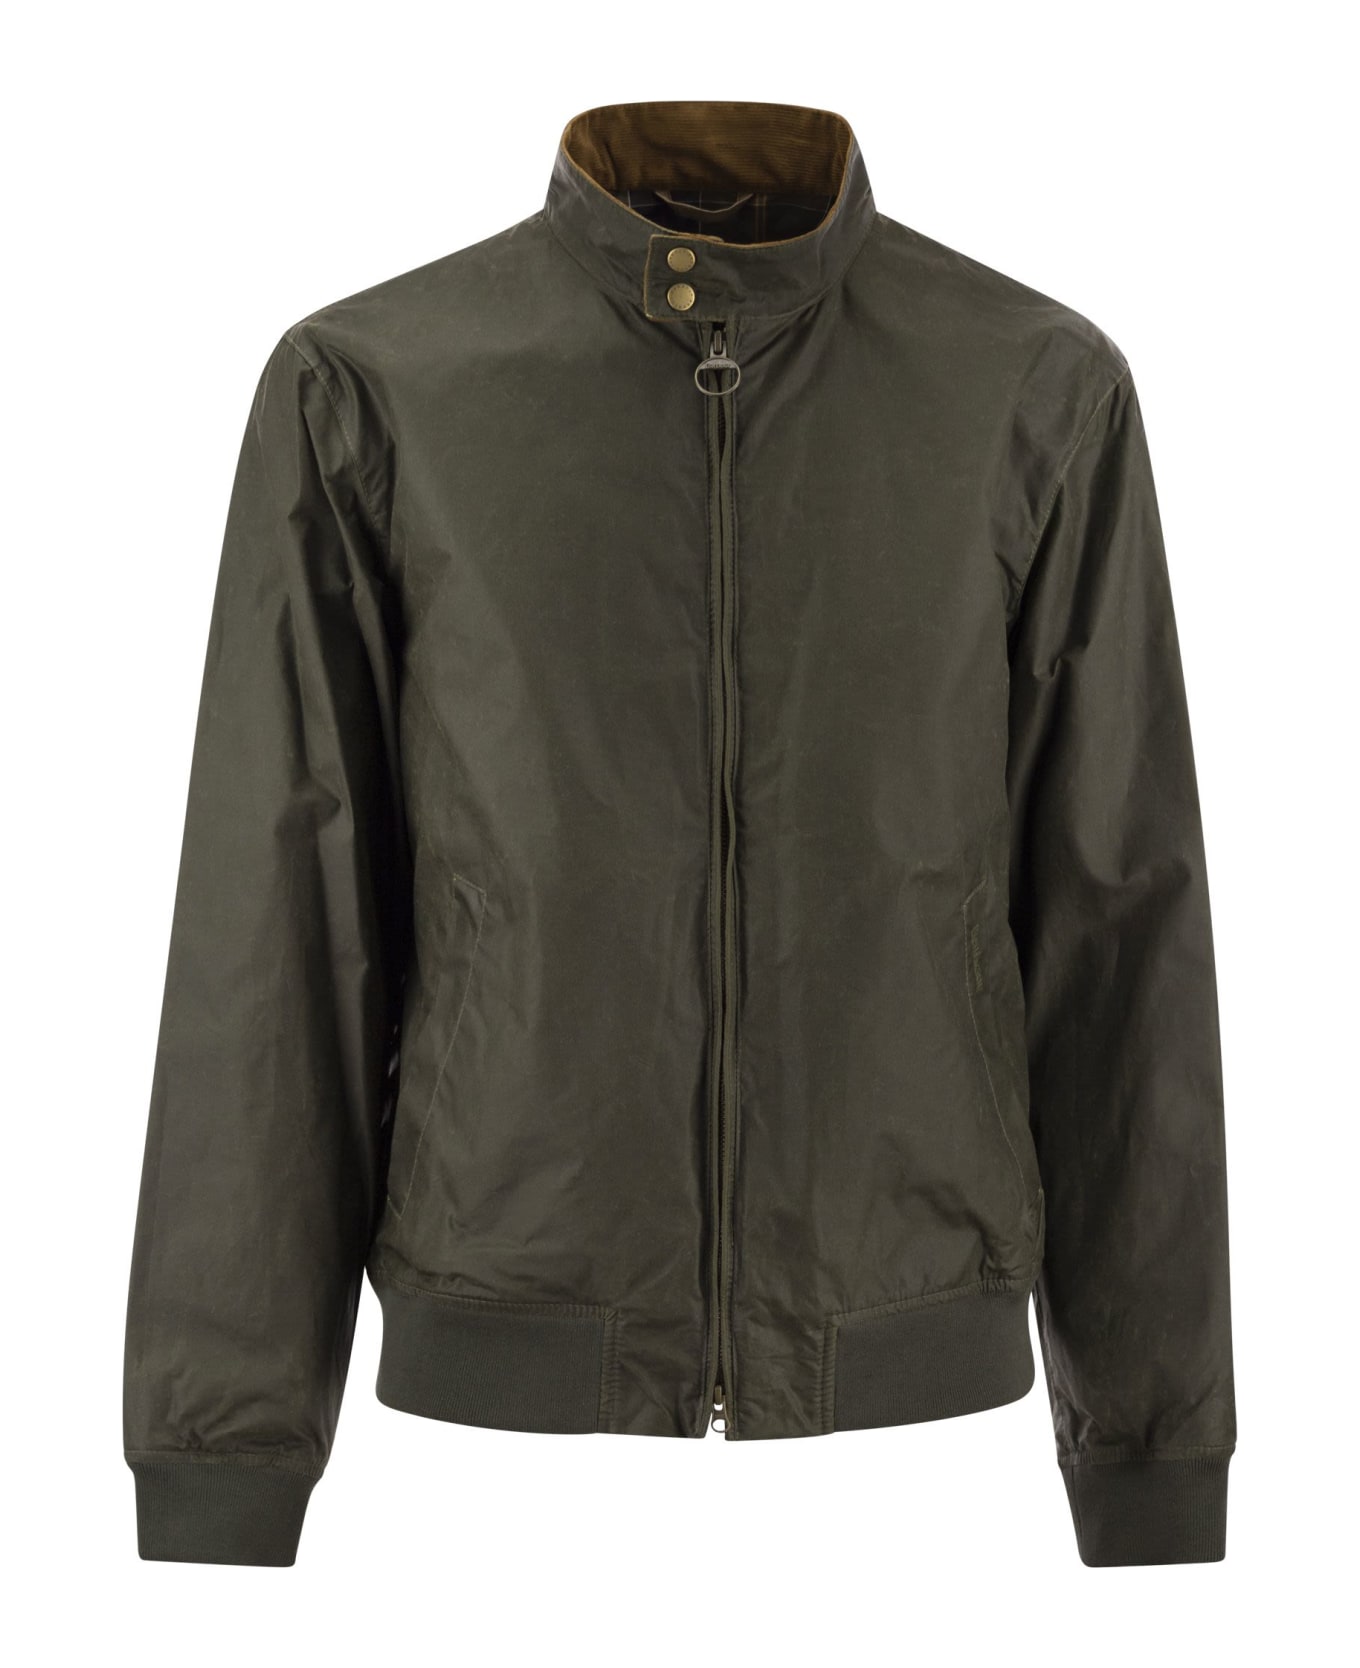 Barbour Royston - Lightweight Waxed Cotton Jacket - Olive Green ジャケット